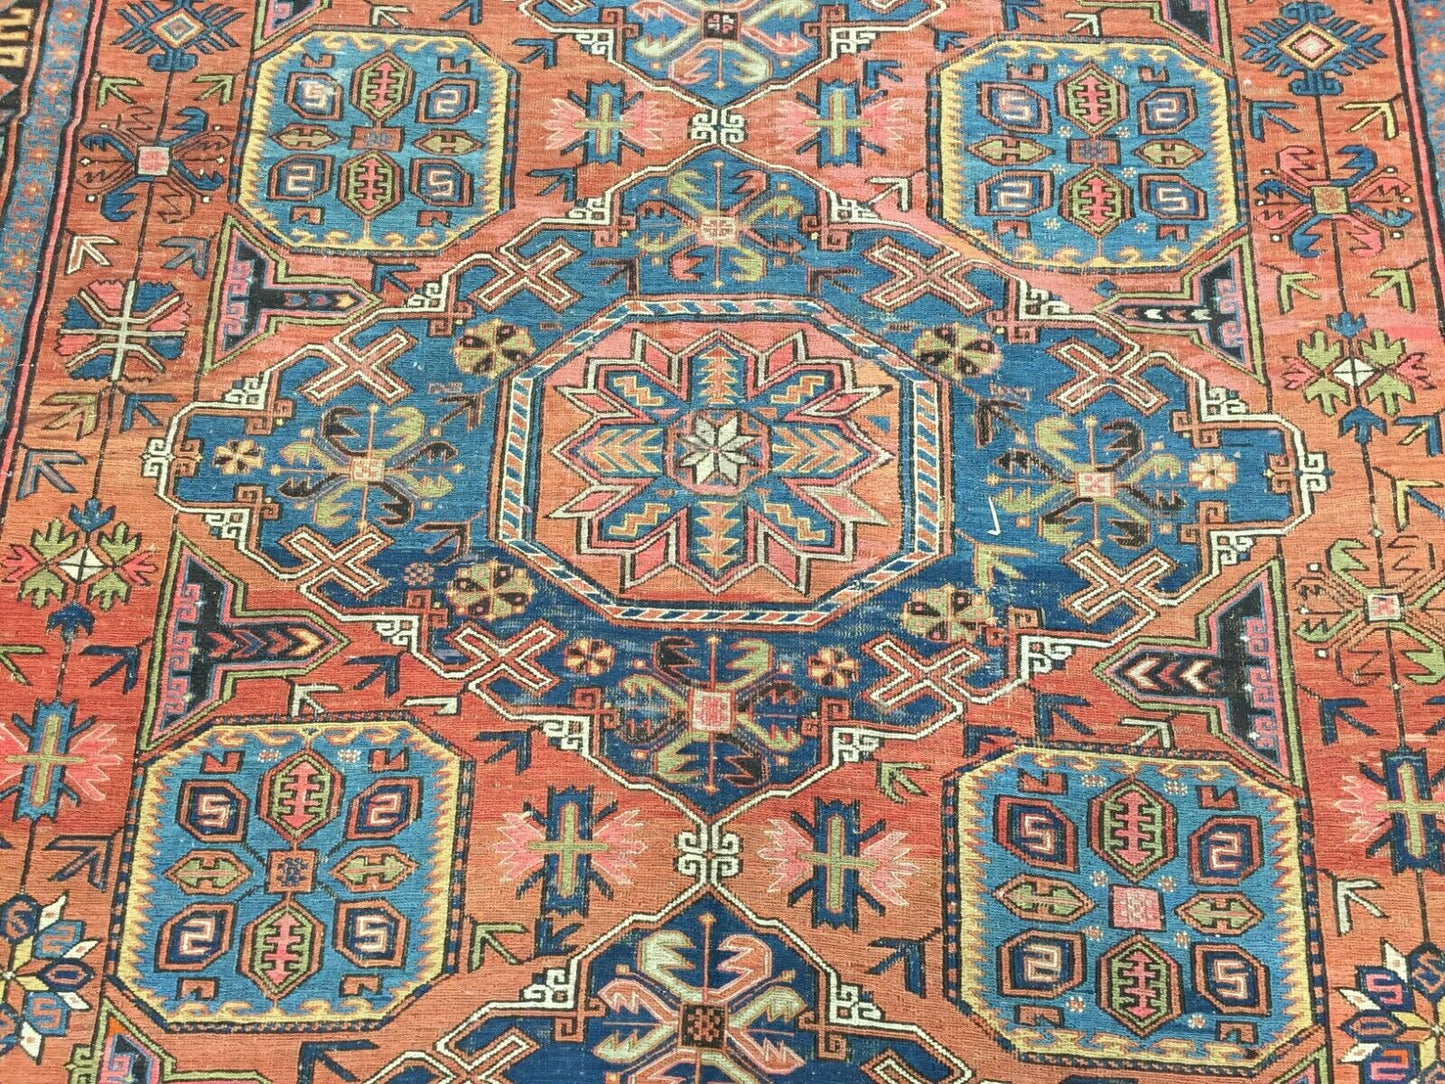 Overhead shot of the rug displaying its symmetrical layout and attention to detail